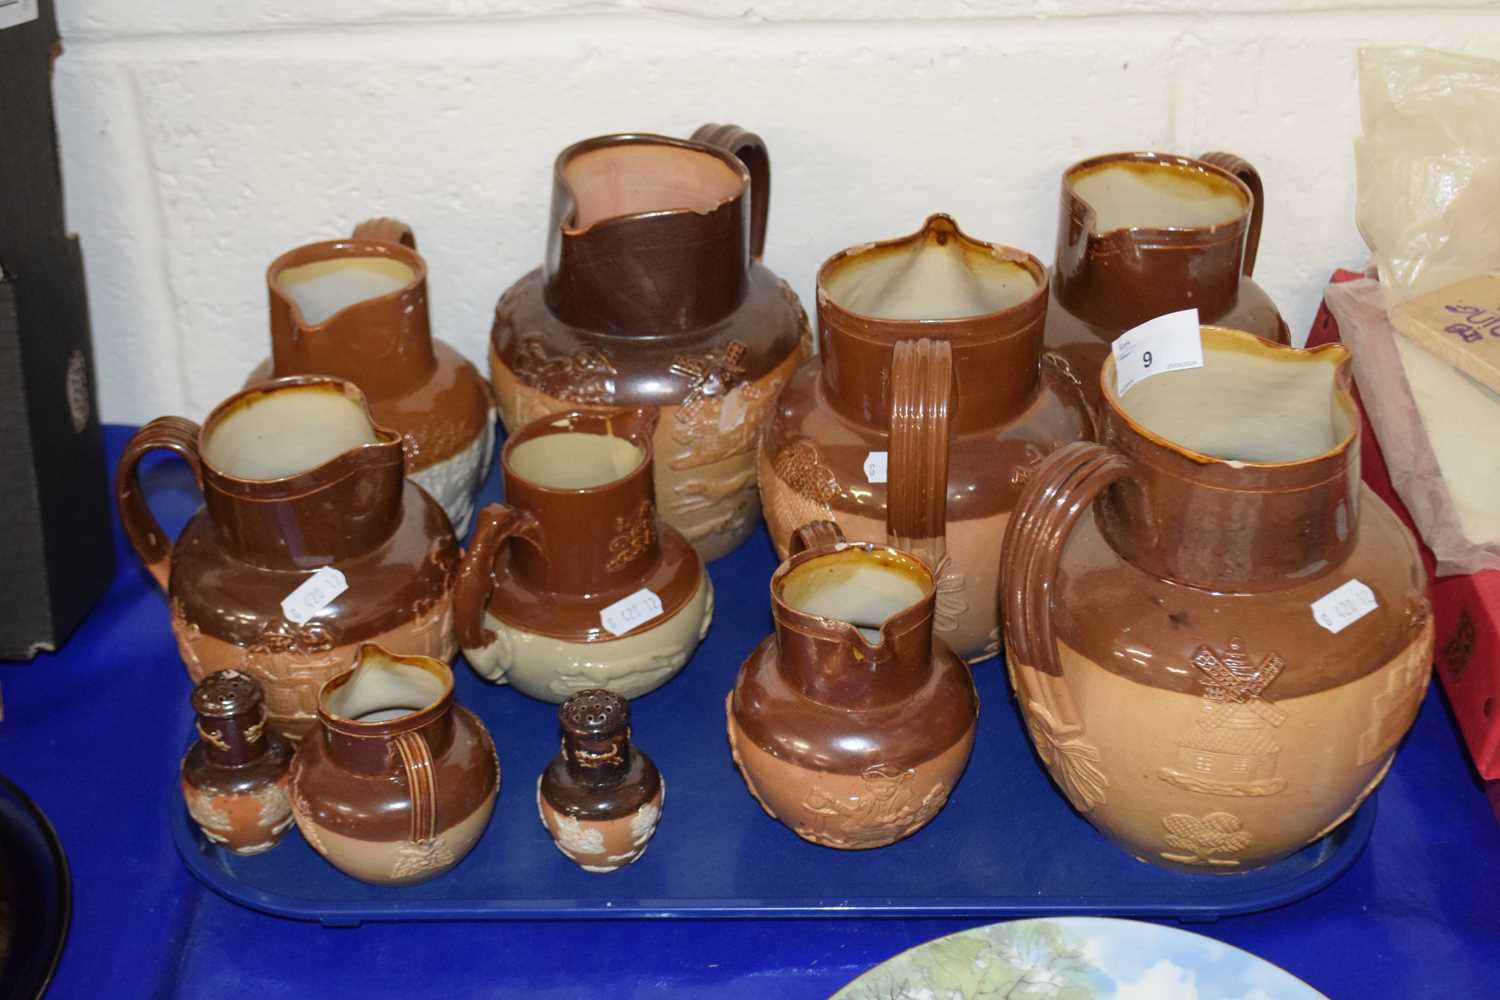 A group of Royal Doulton and other stone ware harvest jugs and similar cruet items